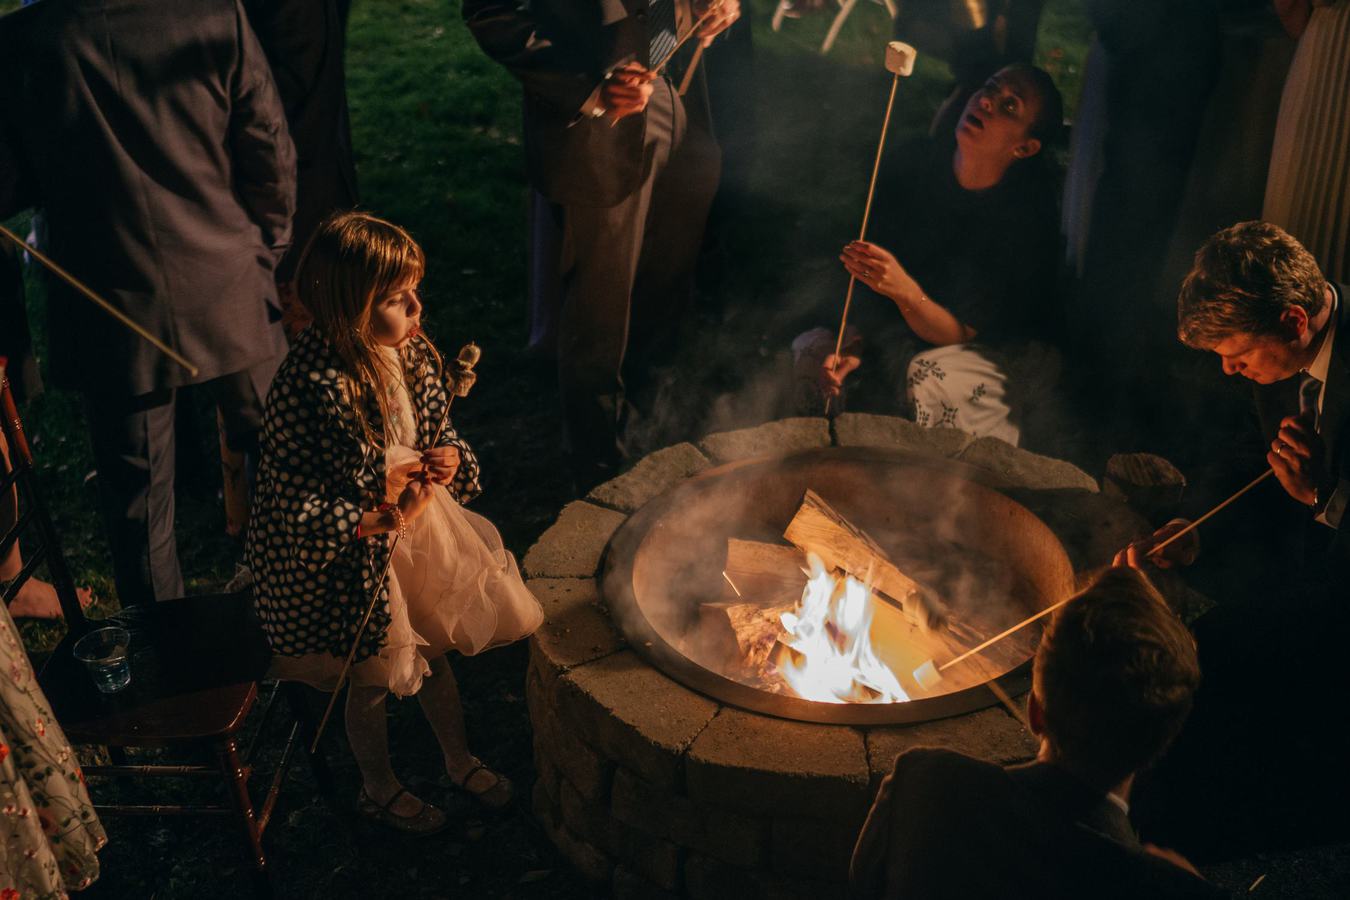 Wedding guests sit around fire pit to make s'mores, and a little girl blows on her marshmallow to cool it down after cooking it.